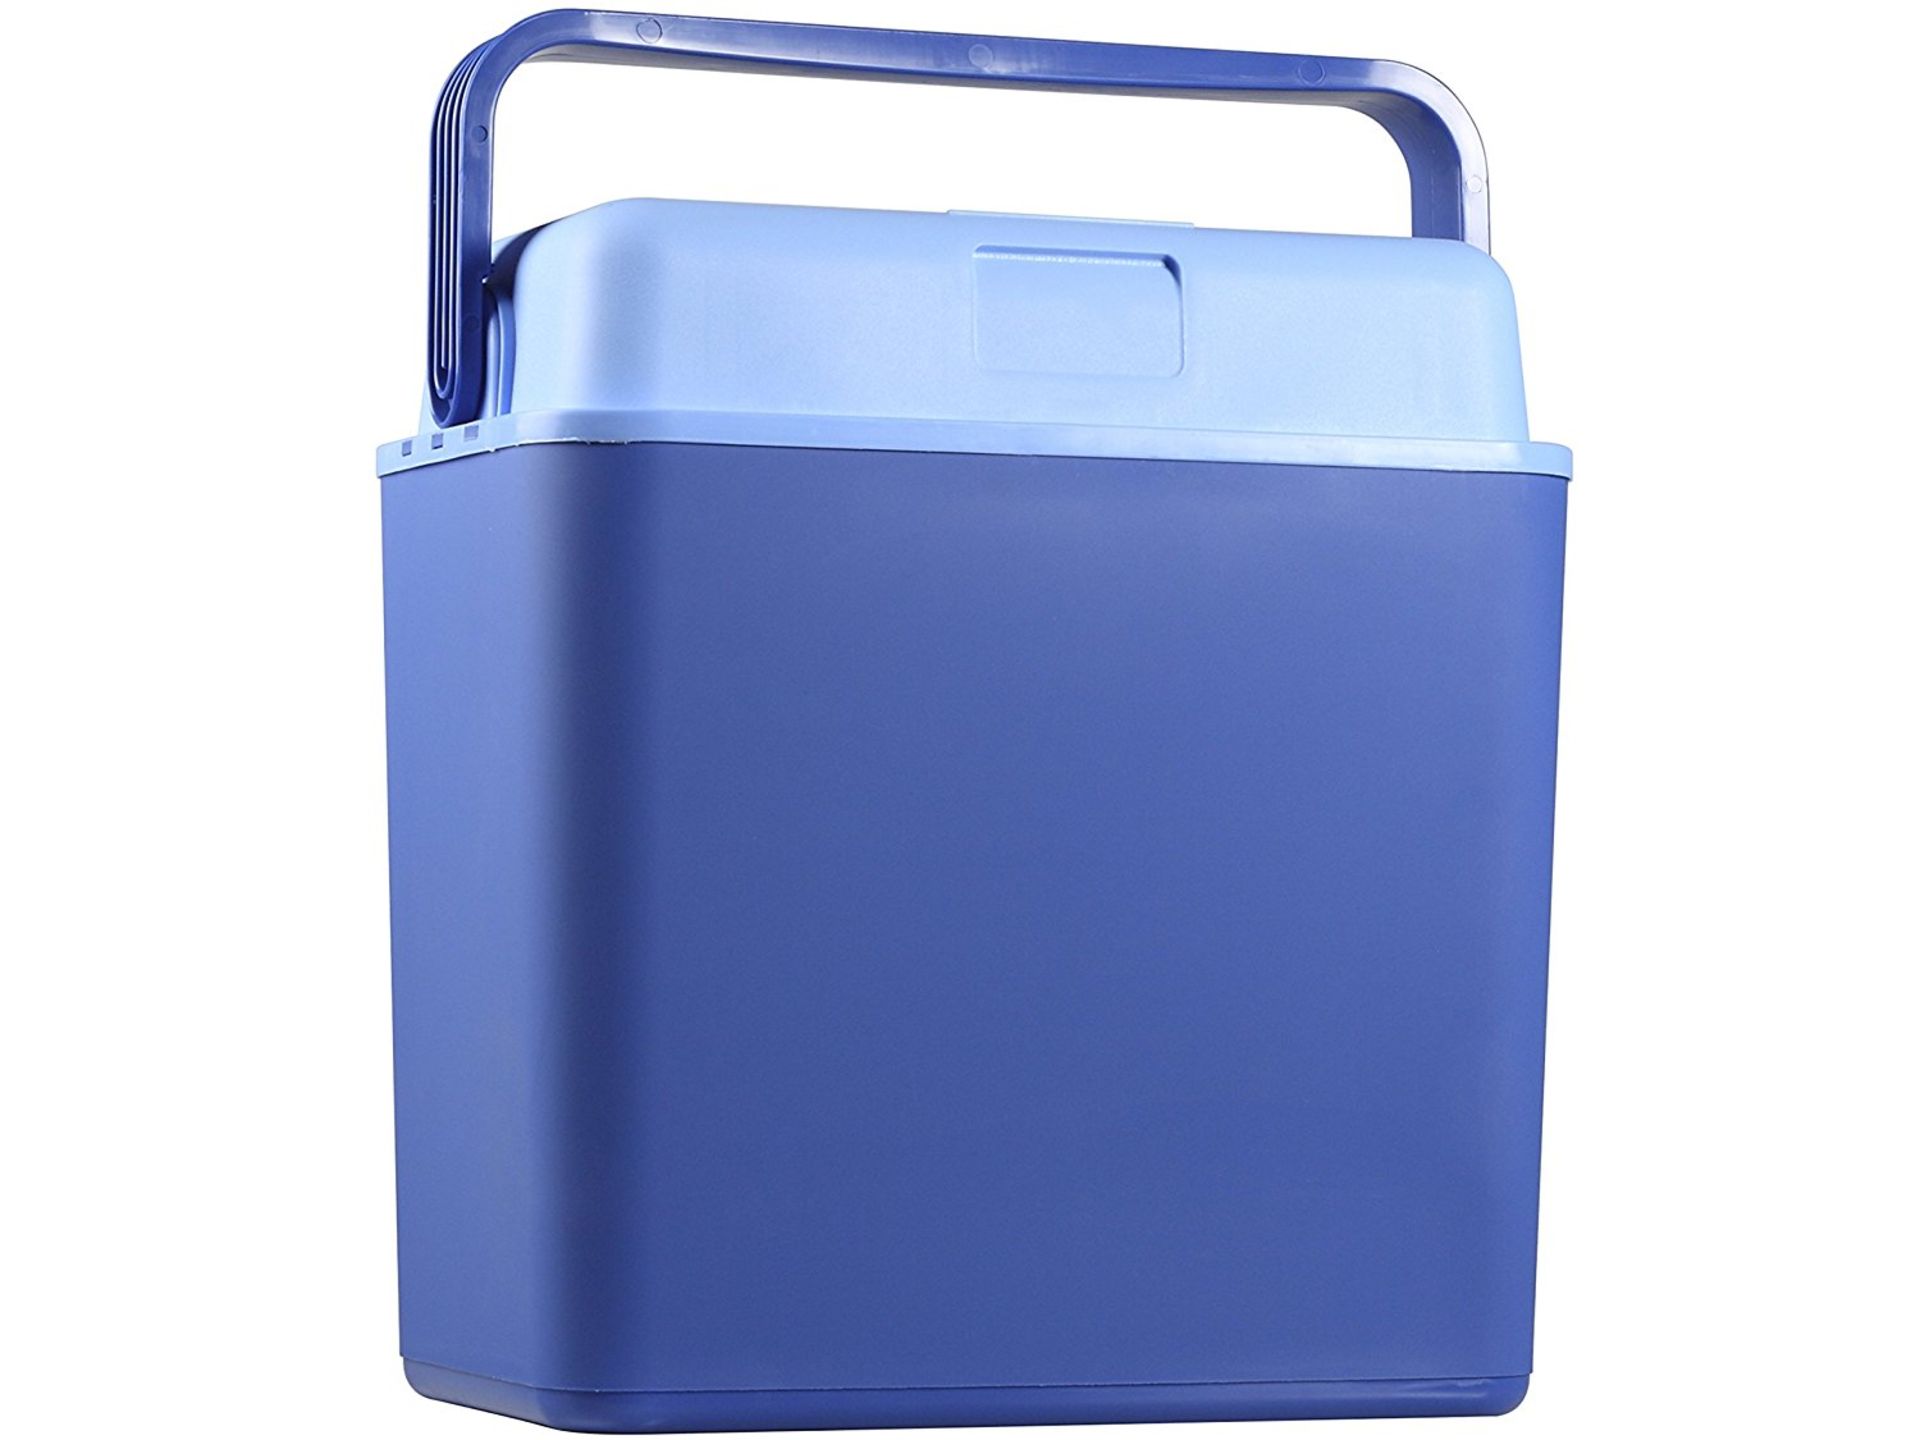 1 x Tristar Thermoelectric 24 Litre Lightweight Cool Box - Ideal For Camping, Picnics or